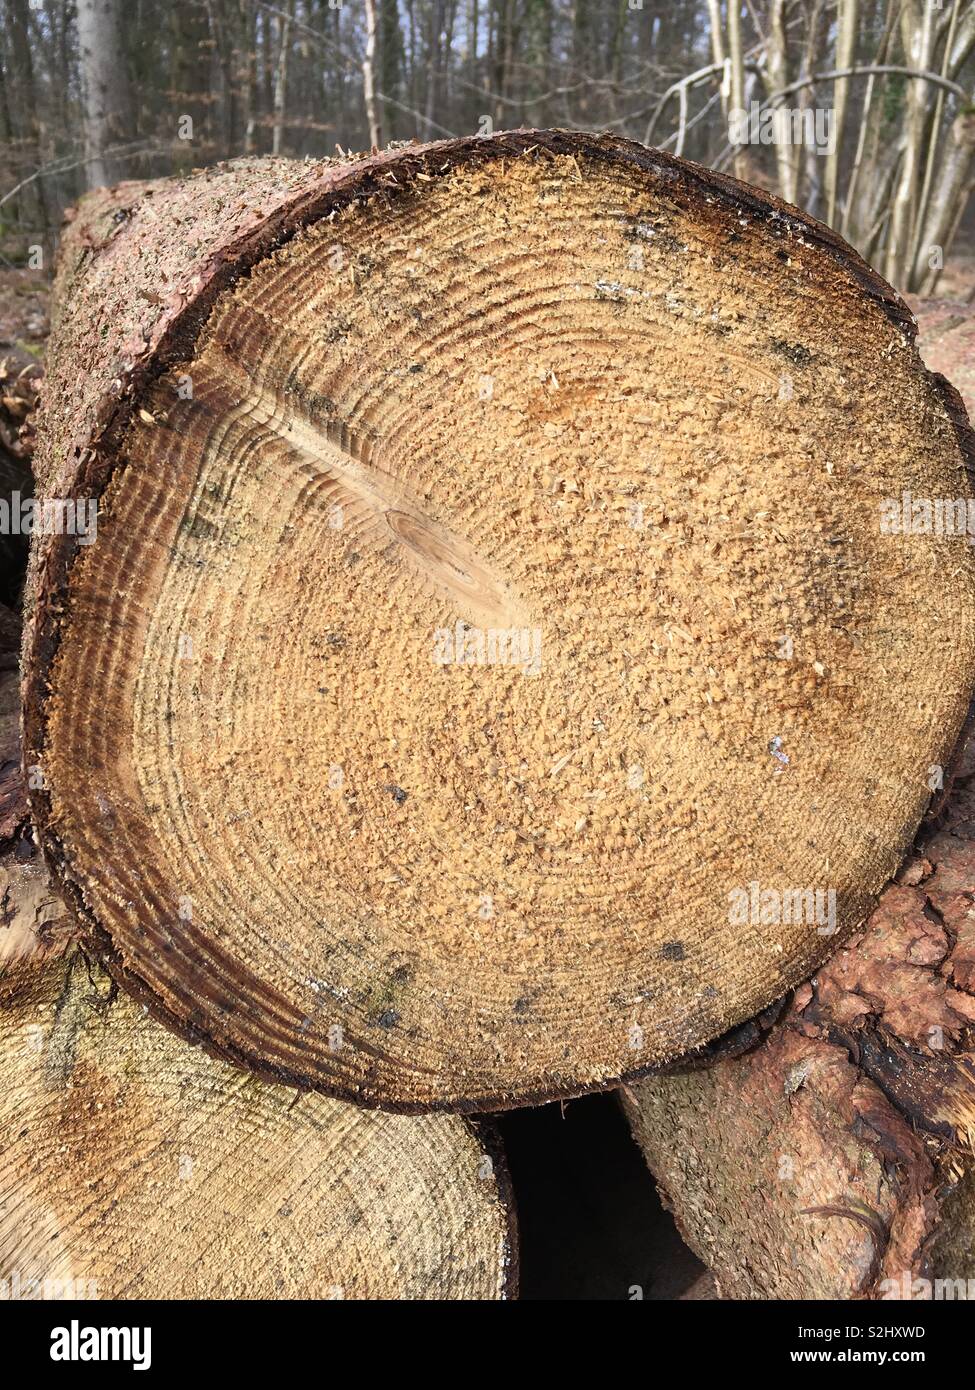 Tree rings to count the age of a tree Stock Photo by ©david734244 56832845